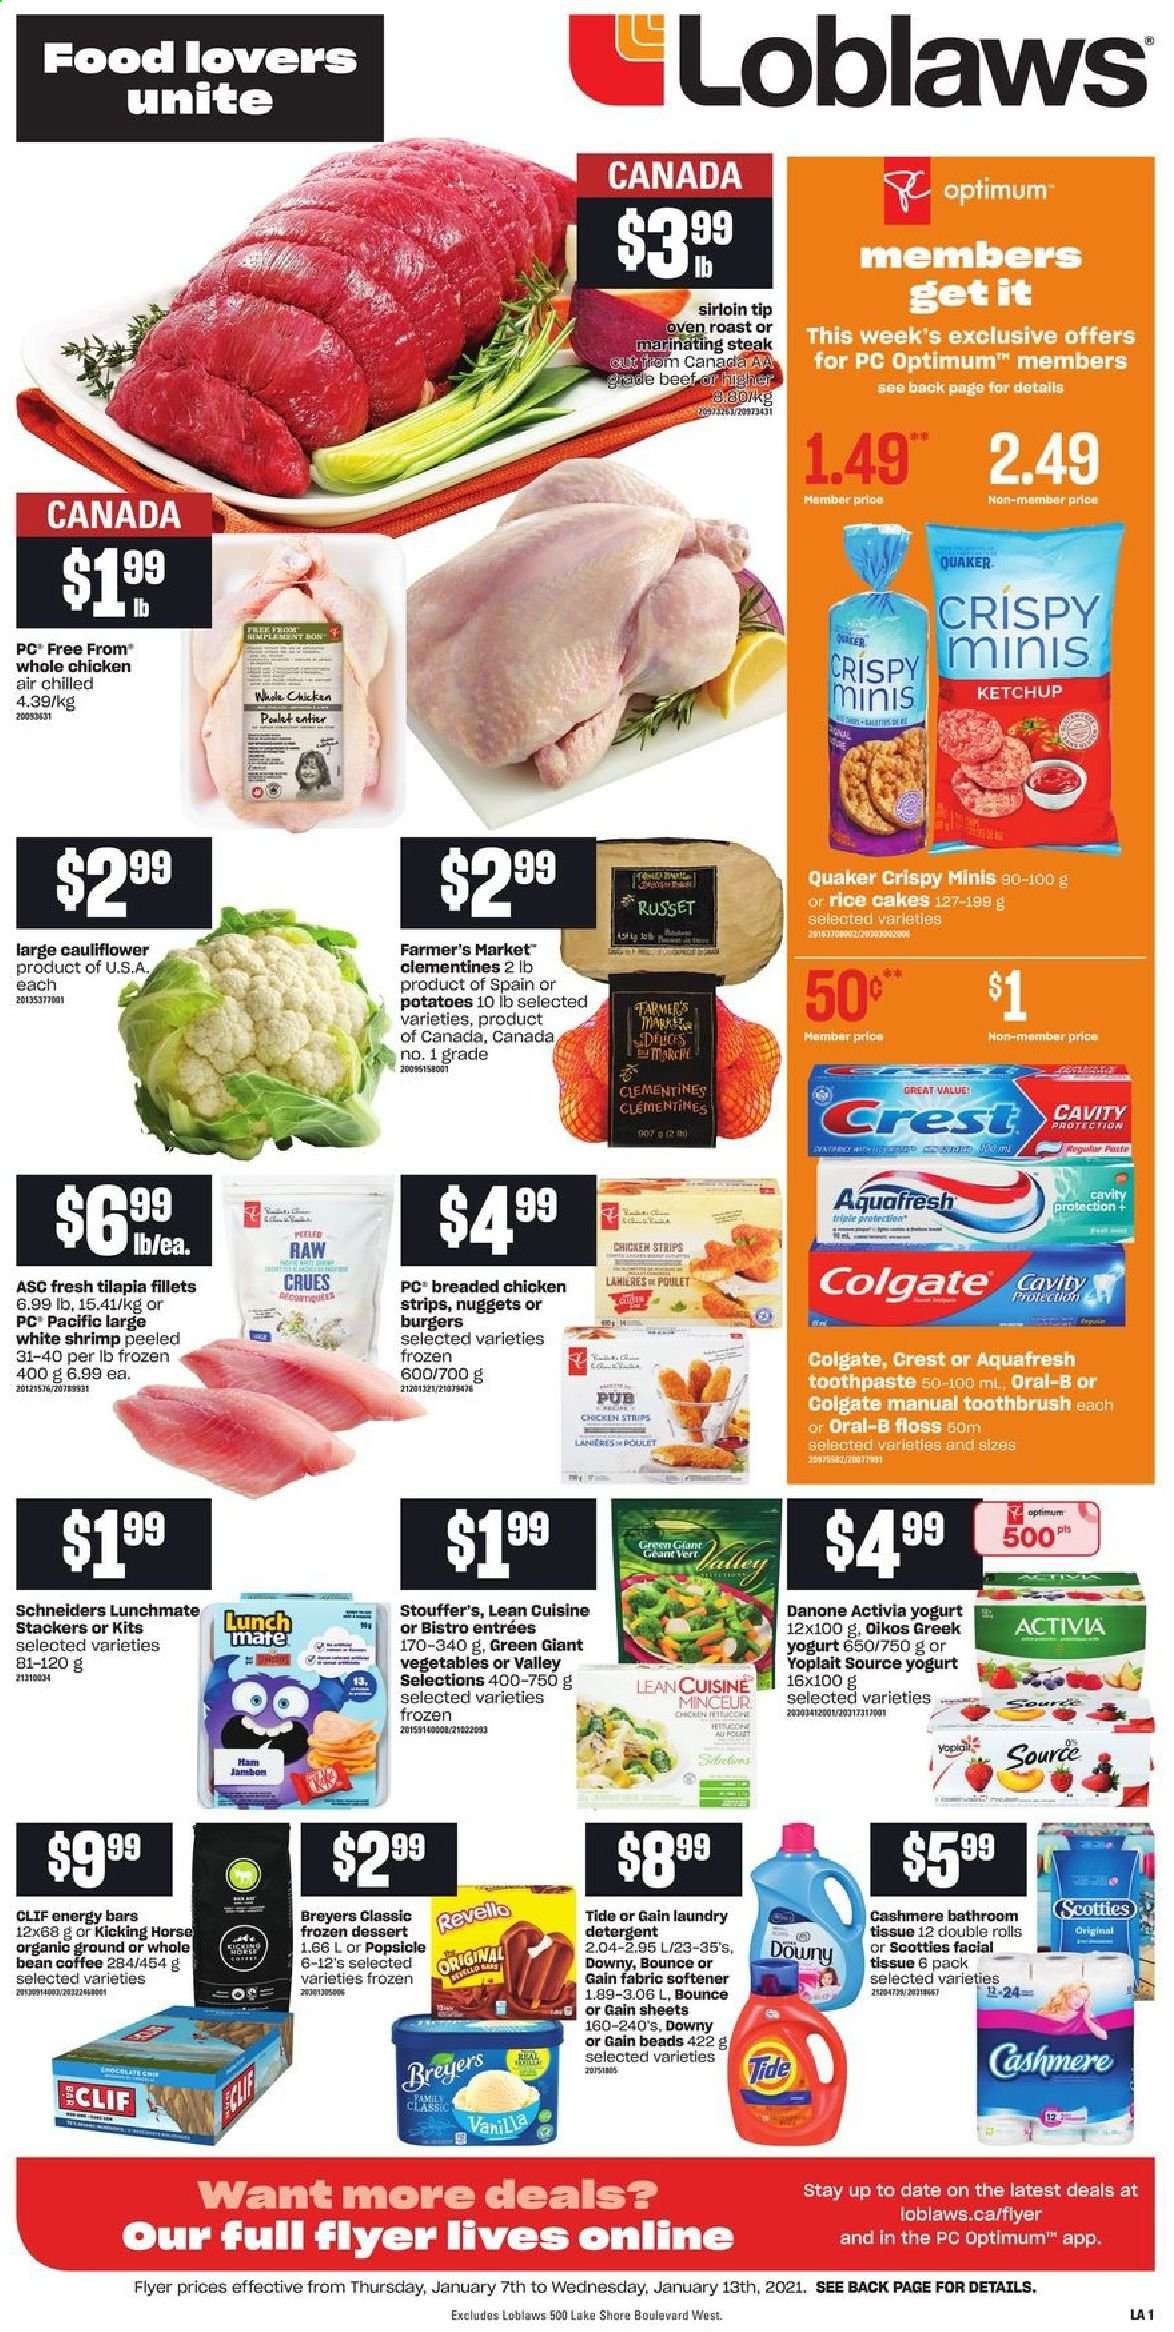 thumbnail - Loblaws Flyer - January 07, 2021 - January 13, 2021 - Sales products - cauliflower, russet potatoes, potatoes, clementines, tilapia, shrimps, nuggets, fried chicken, Quaker, Lean Cuisine, ham, greek yoghurt, yoghurt, Activia, Oikos, Yoplait, strips, chicken strips, Stouffer's, energy bar, coffee, whole chicken, chicken, bath tissue, Gain, Tide, fabric softener, laundry detergent, toothbrush, toothpaste, Crest, Optimum, Danone, Oral-B, steak. Page 1.